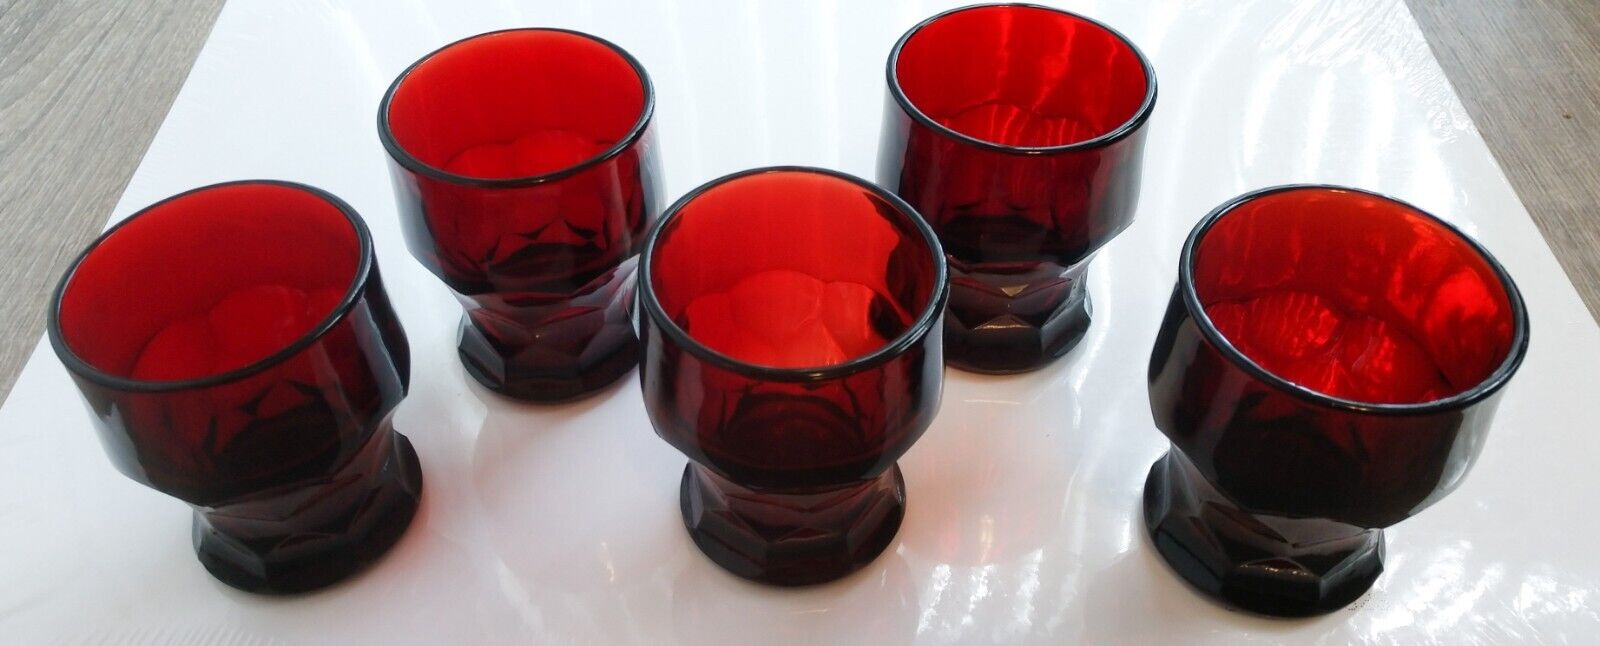 5 Small Ruby Red Georgian Glasses No Damage